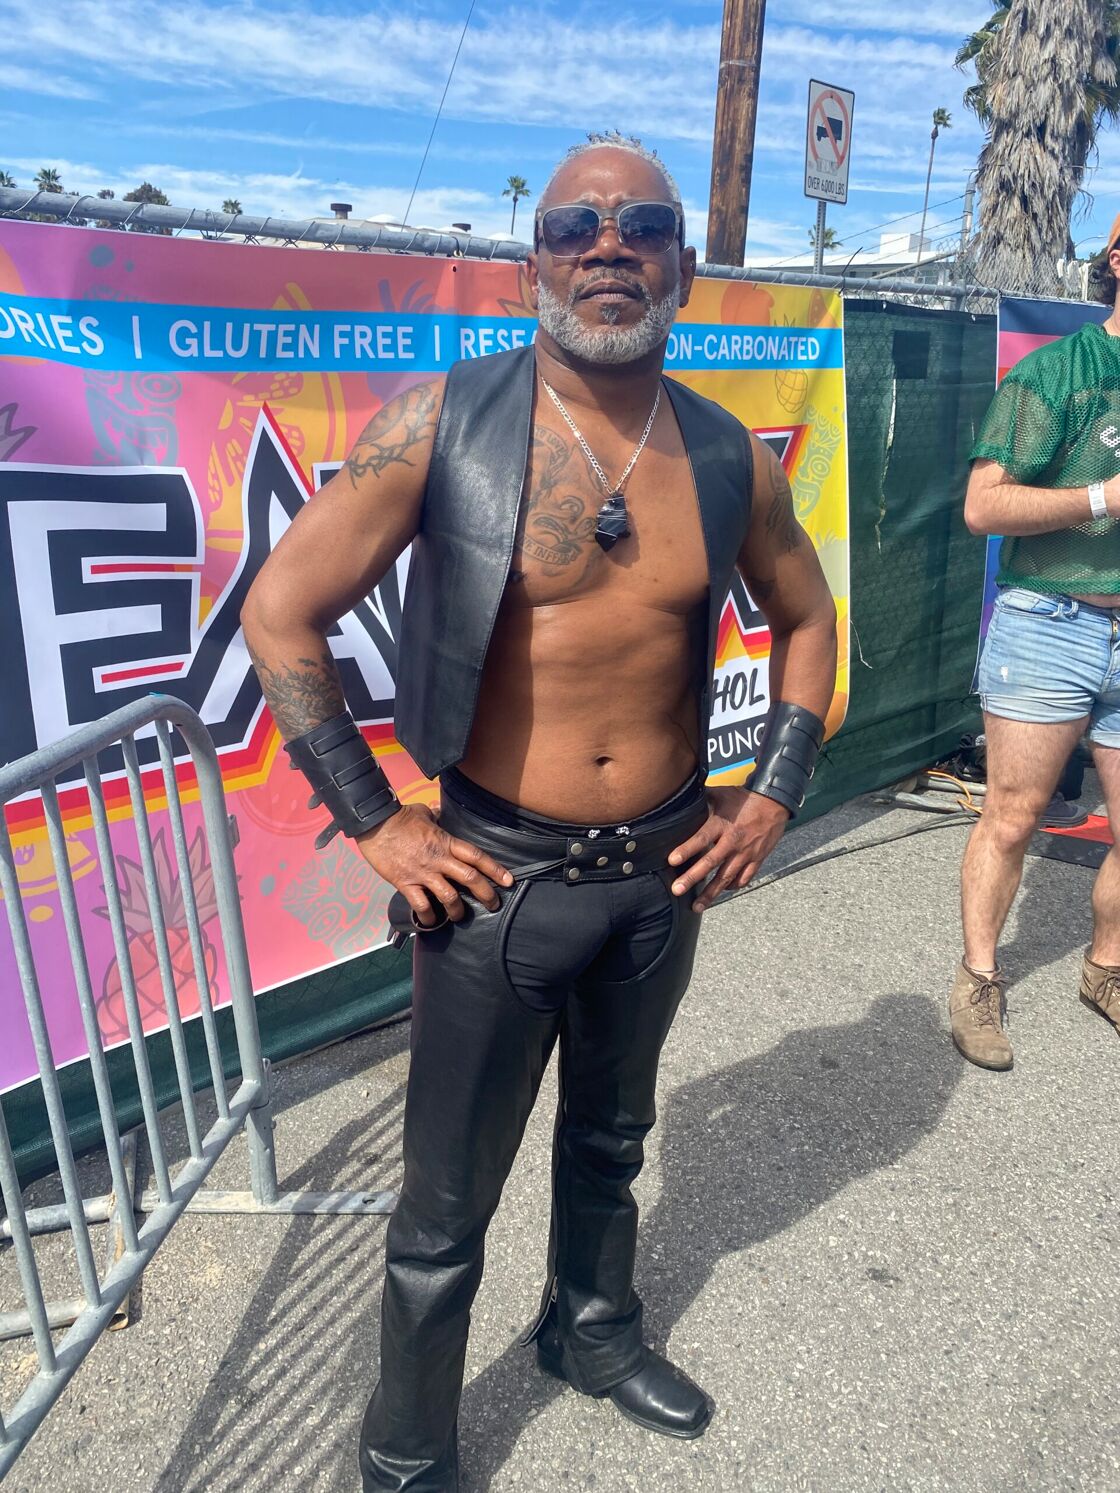 LA daddy and East Village ex-pat greeting the kinksters as they enter Off Sunset Festival.